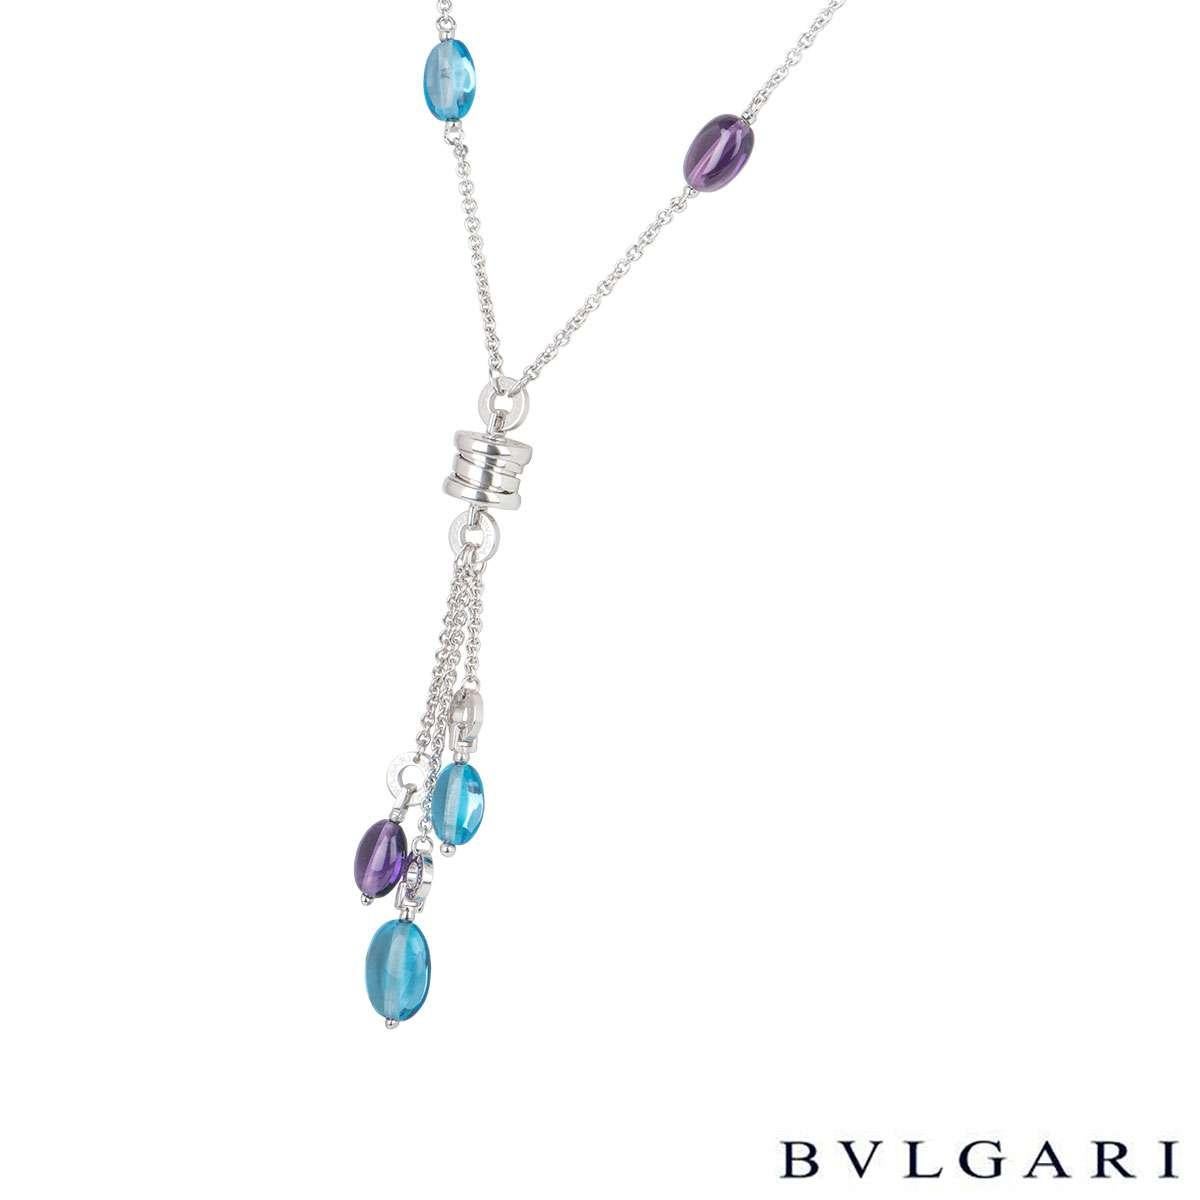 A beautiful 18k white gold amethyst and topaz Bvlgari necklace and earring suite from the B.zero1 collection. The necklace comprises of a single amethyst and topaz bead in the chain leading to the white gold B.zero1 motif. Suspended from the central